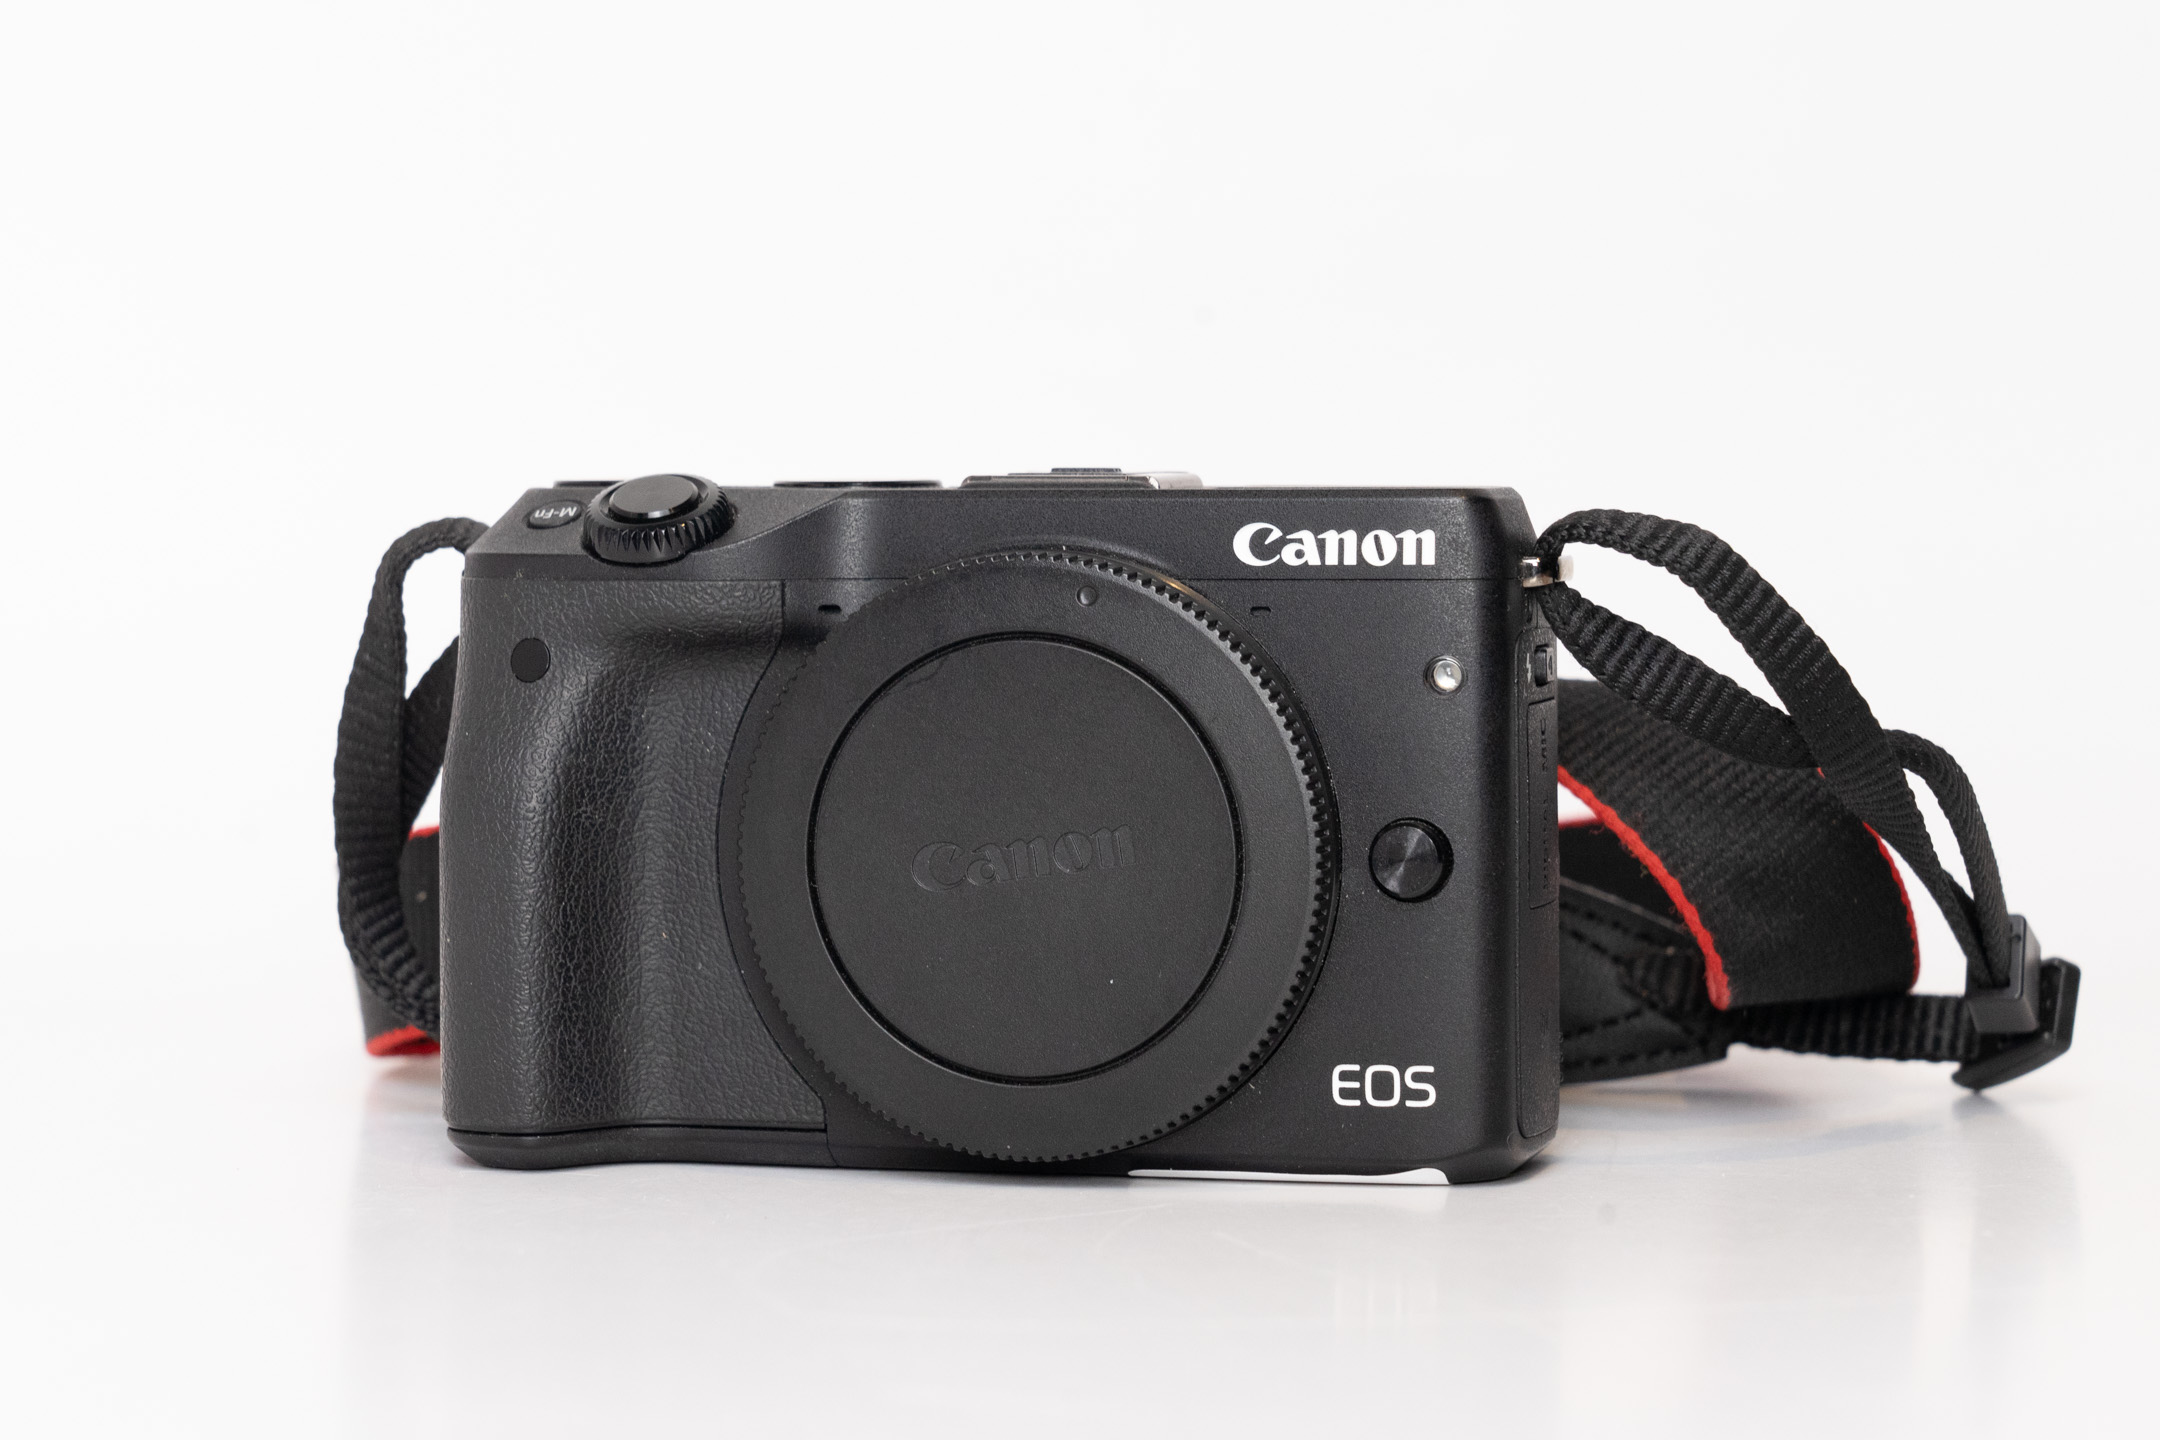 Used Canon EOS M3 Body From Focal Point Photography On Gear Focus